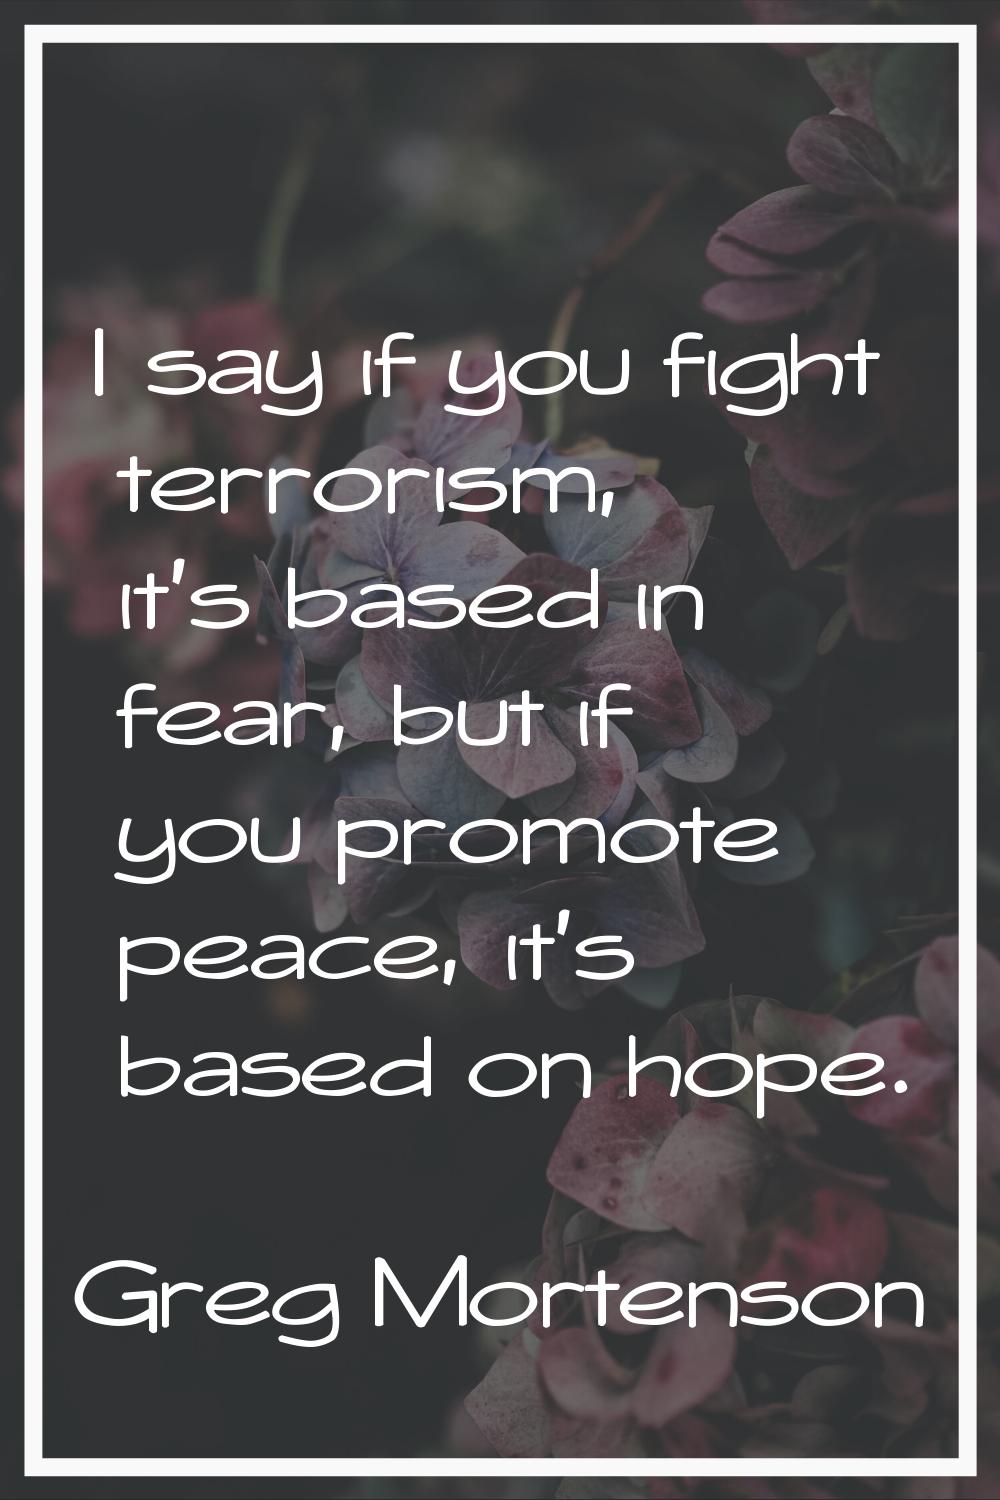 I say if you fight terrorism, it's based in fear, but if you promote peace, it's based on hope.